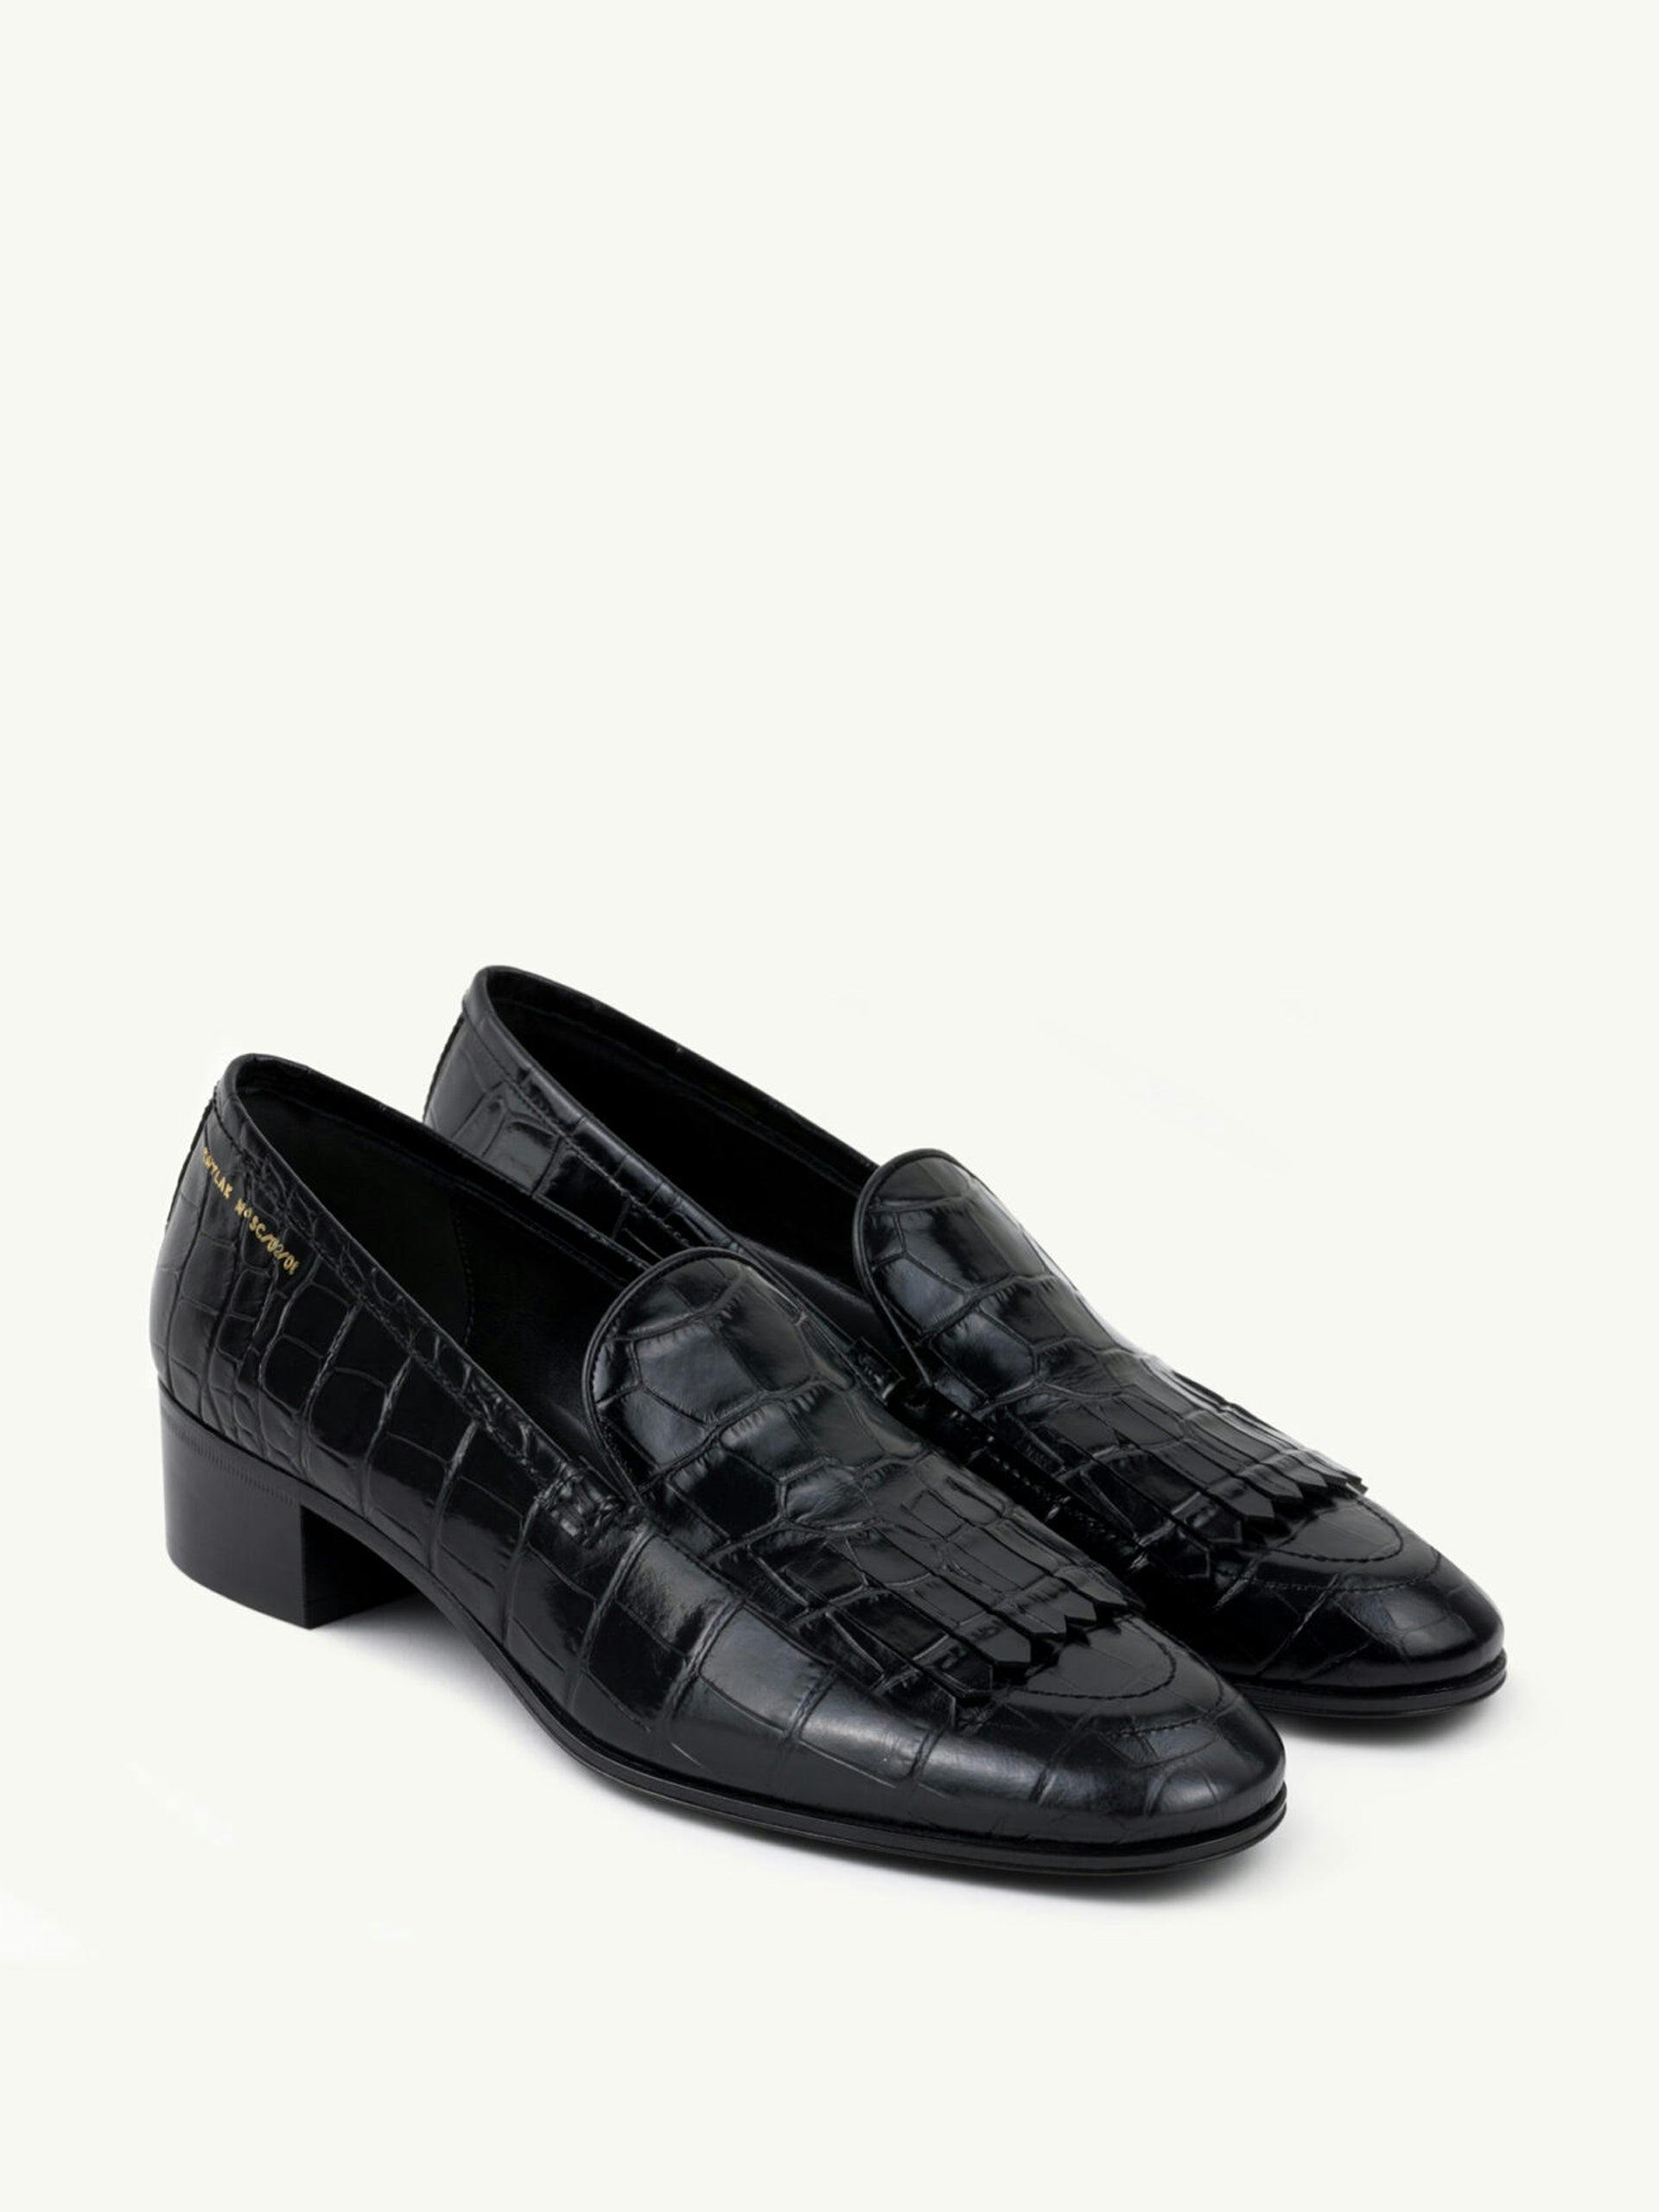 Embossed leather fringed loafers